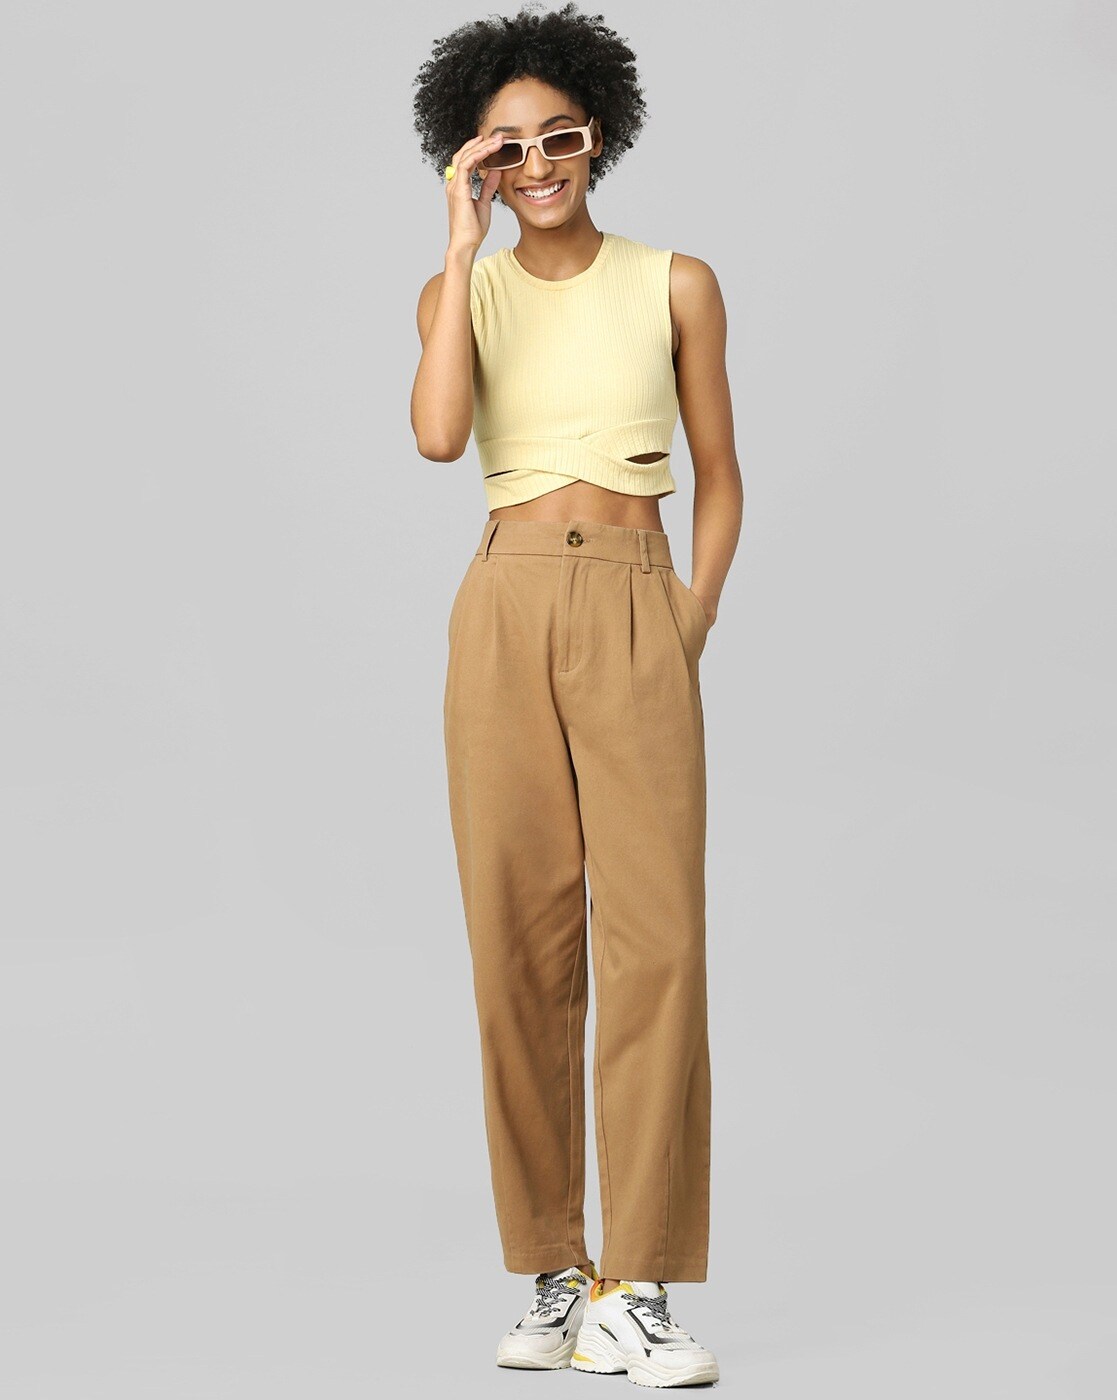 Women's High-rise Tailored Trousers - A New Day™ Brown 16 : Target